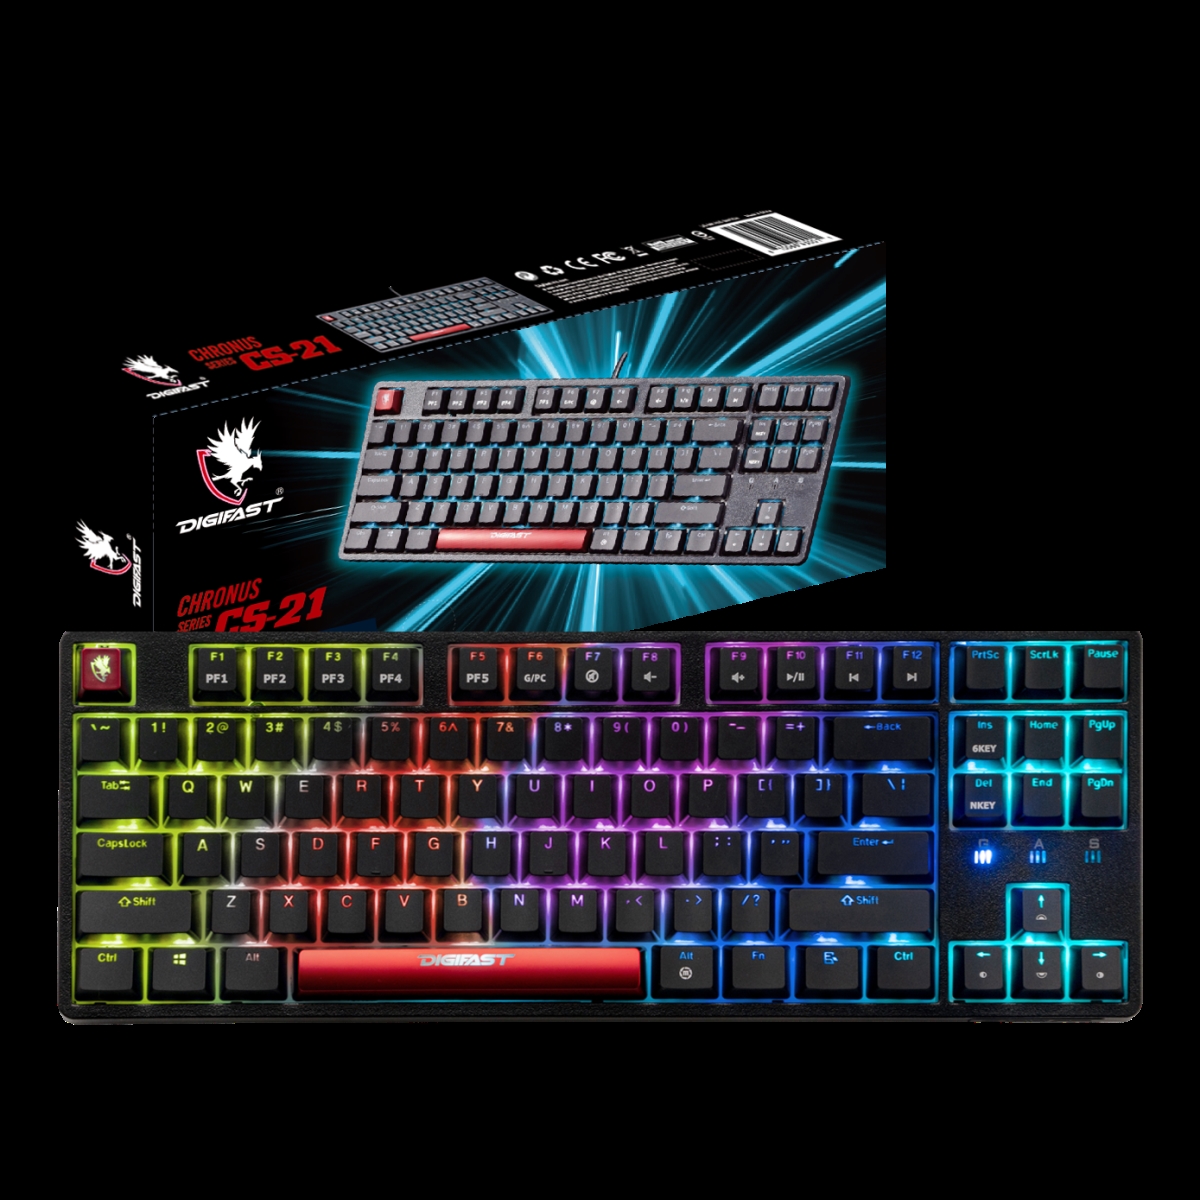 Picture of Digifast CS-21-B DIGIFAST Mechanical RGB Tenkeyless Gaming Chronus Series Keyboard with Cherry MX Switches - Blue Axis